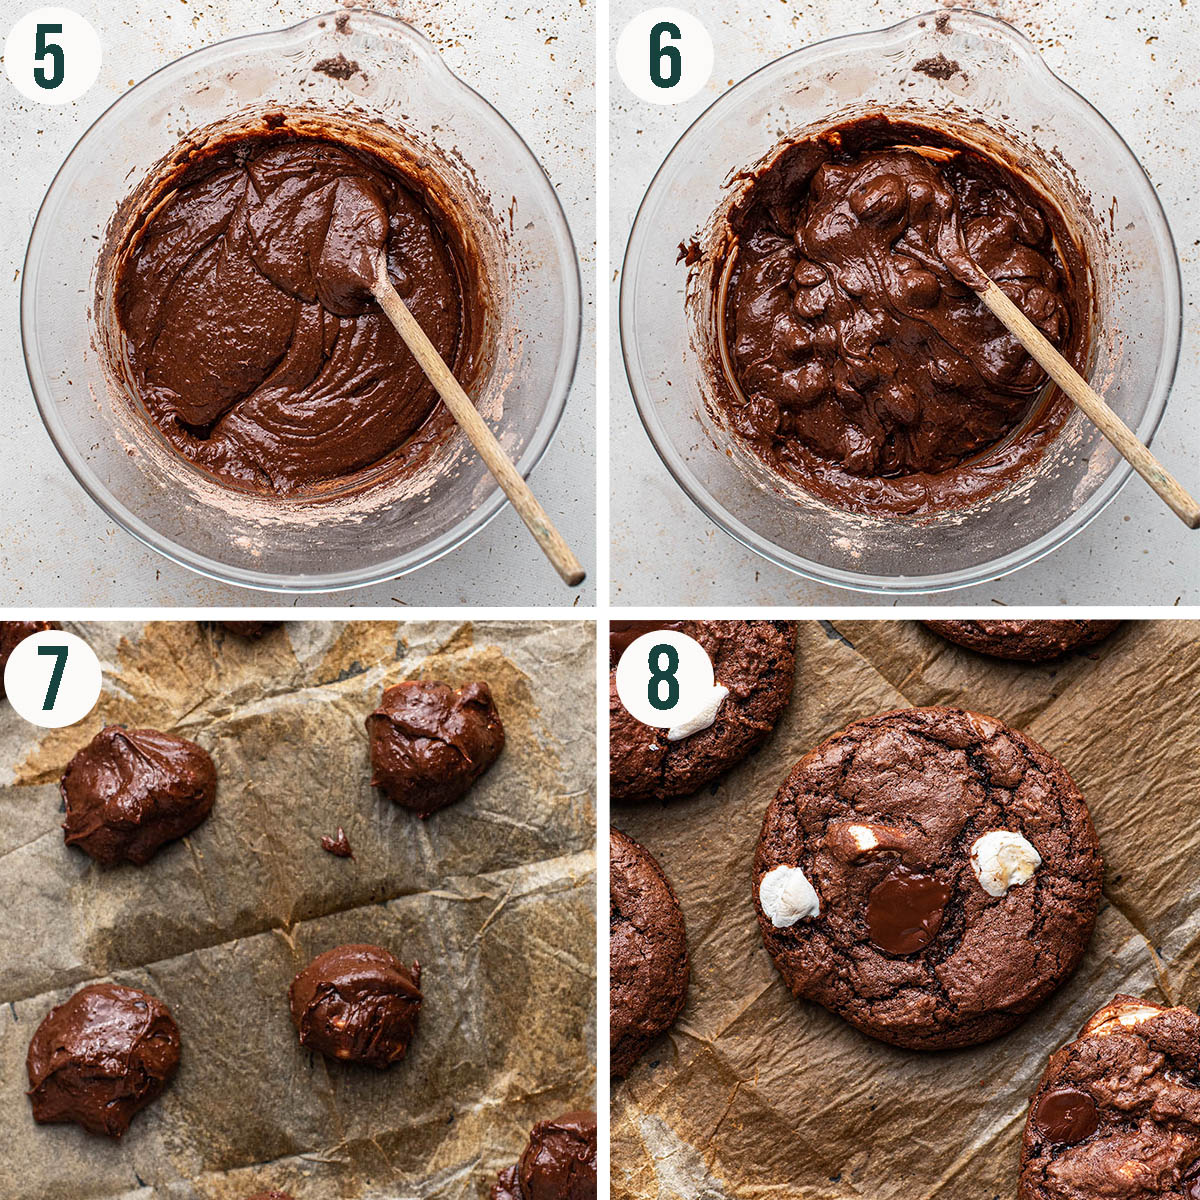 Chocolate marshmallow cookies steps 5 to 8, finishing batter and before and after baking.